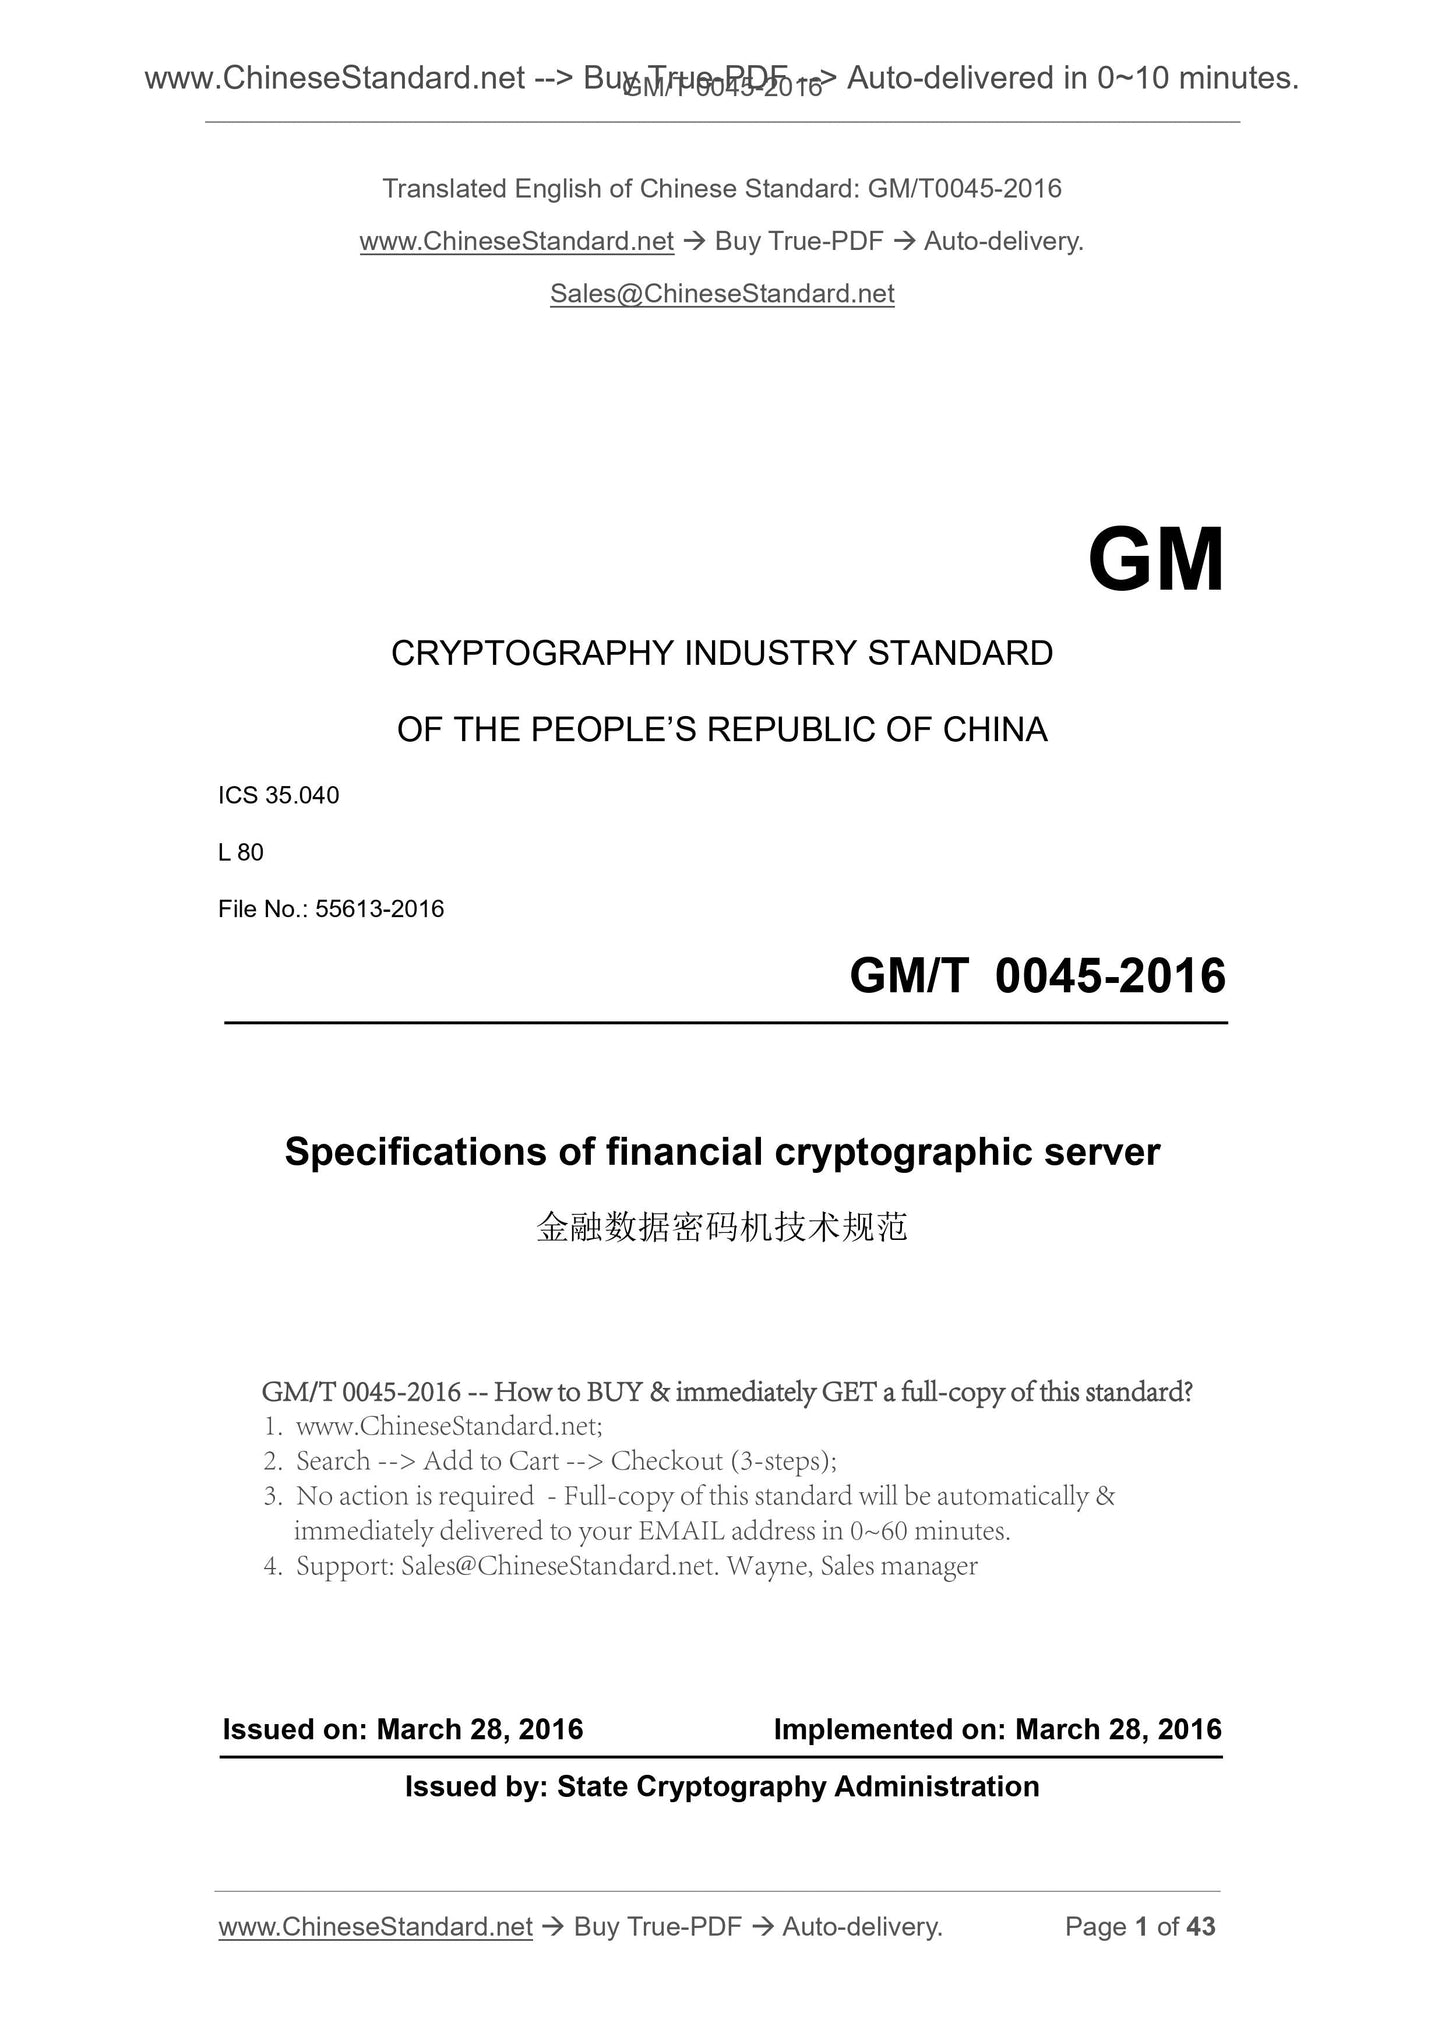 GM/T 0045-2016 Page 1